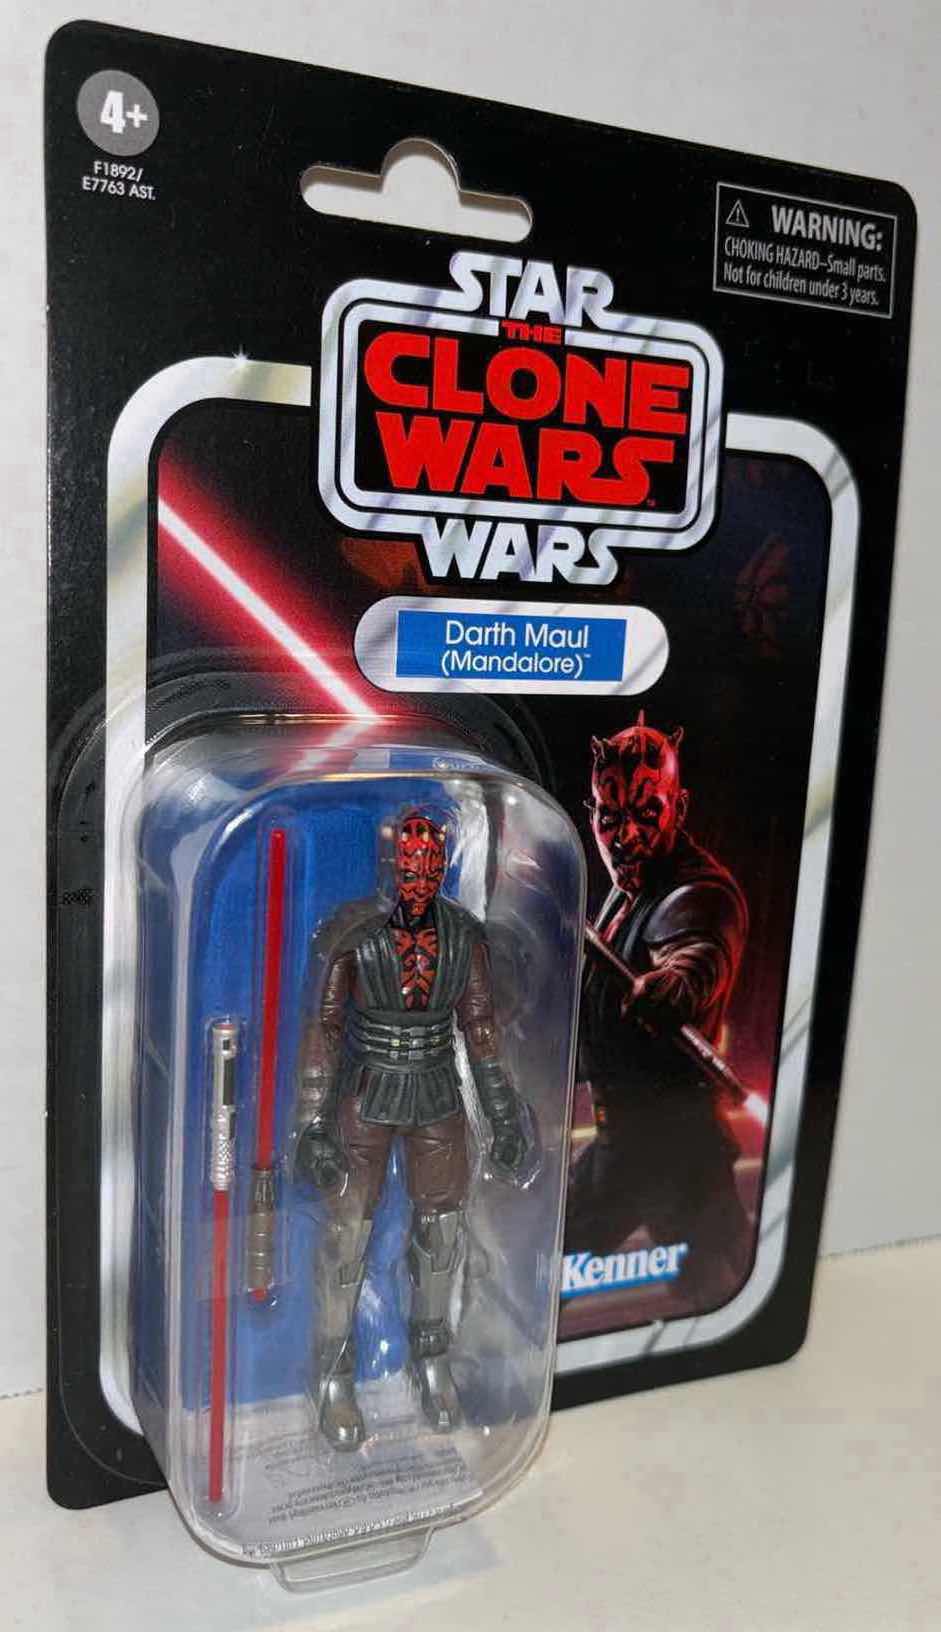 Photo 1 of NEW STAR WARS THE CLONE WARS 3.75” THE VINTAGE COLLECTION ACTION FIGURE & ACCESSORIES, “DARTH MAUL (MANDALORE)” (1)